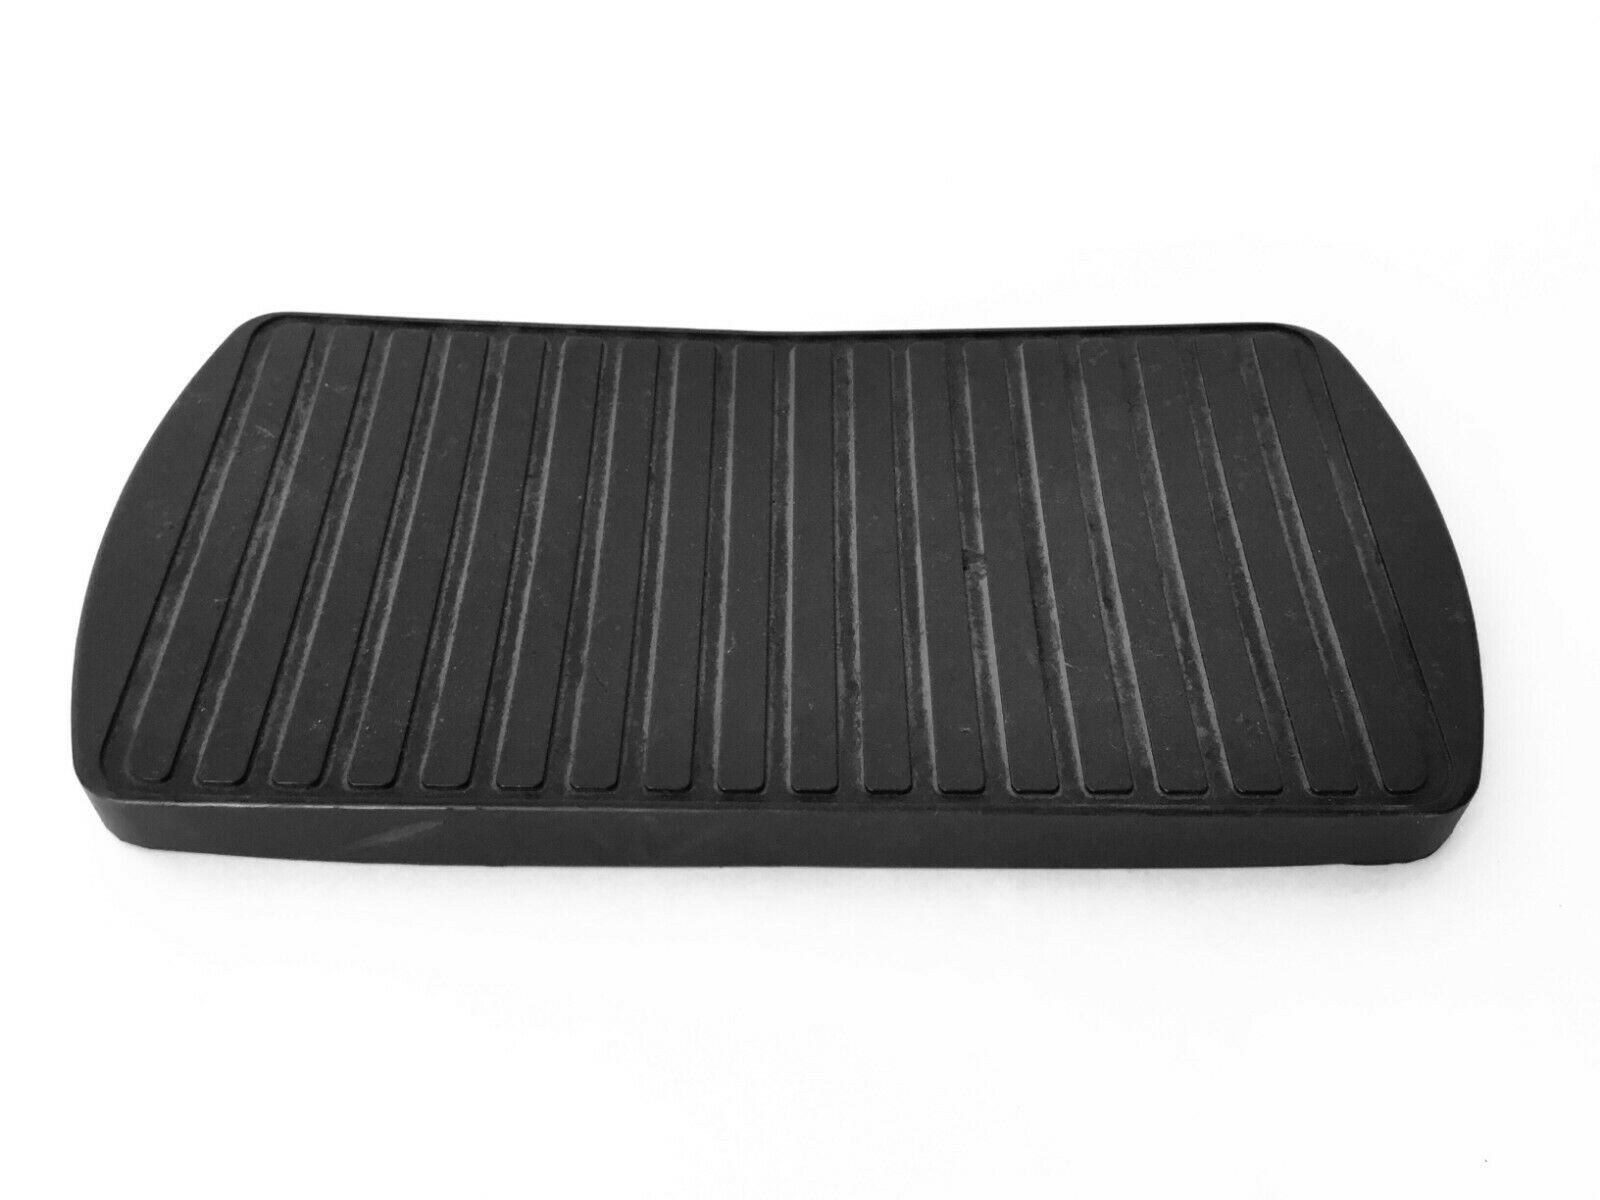 Foot Pad for Pedals (Used)